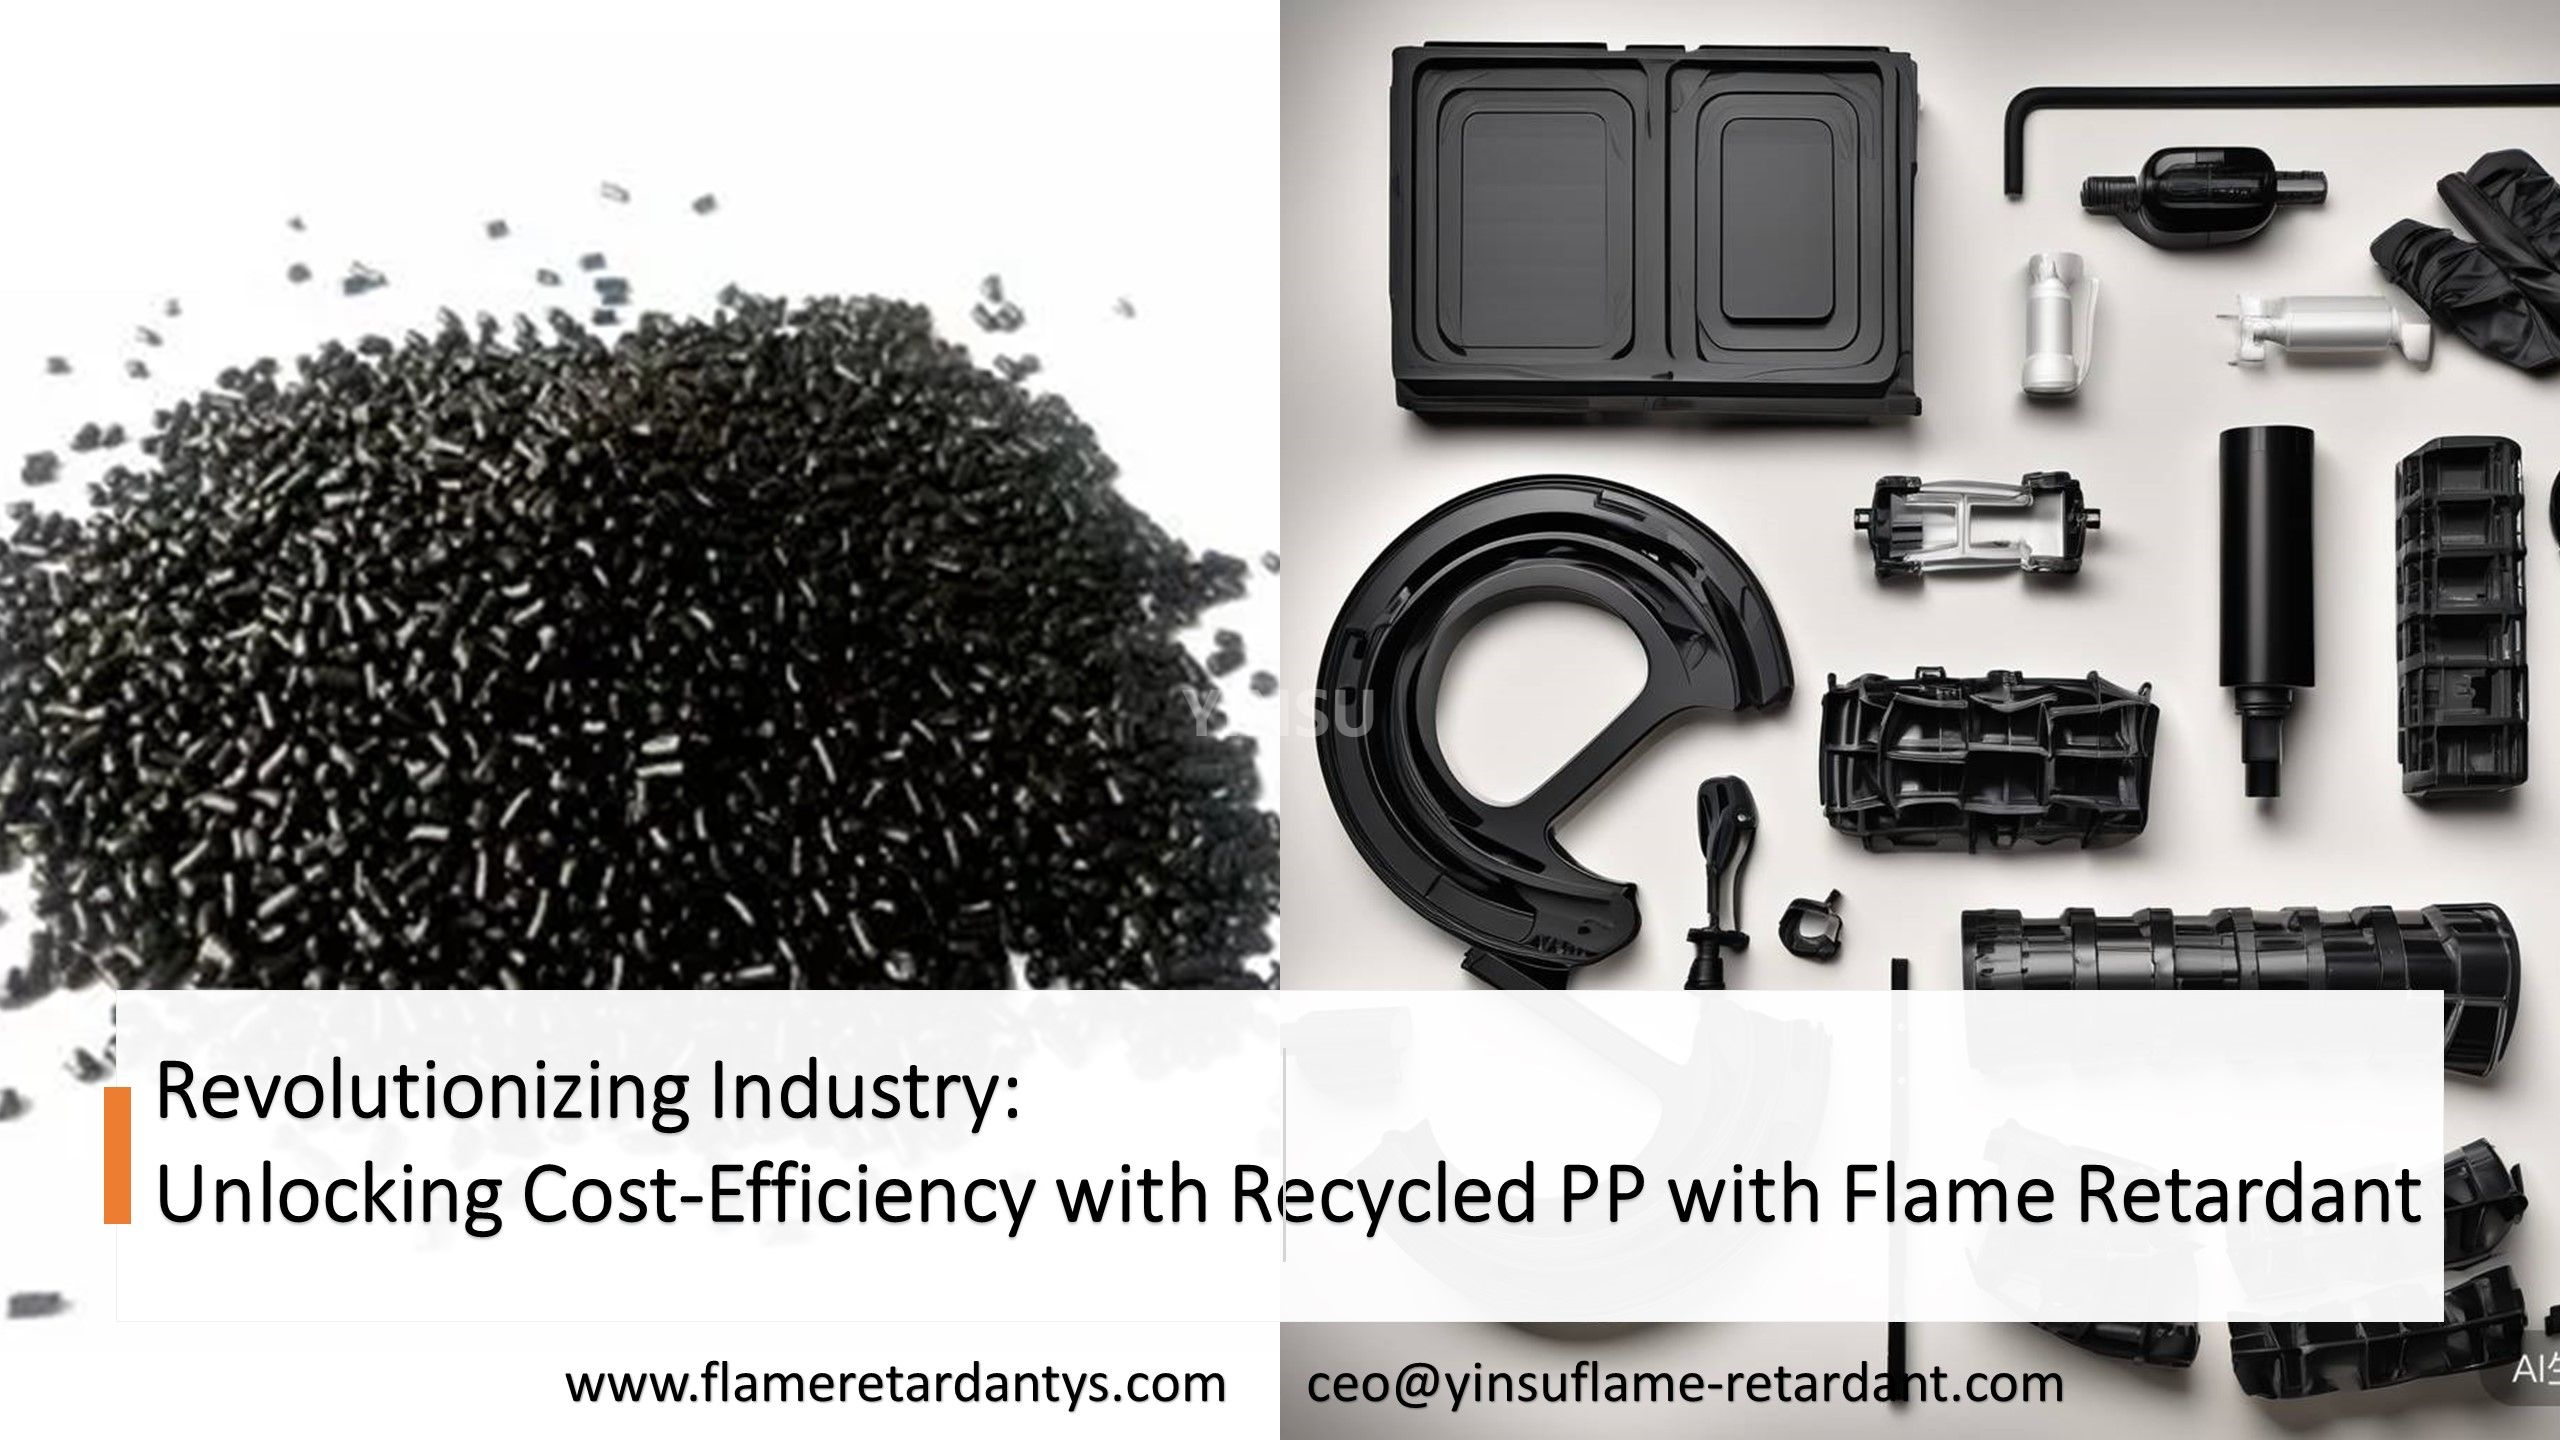 Revolutionizing Industry: Unlocking Cost-Efficiency with Recycled PP with Flame Retardant